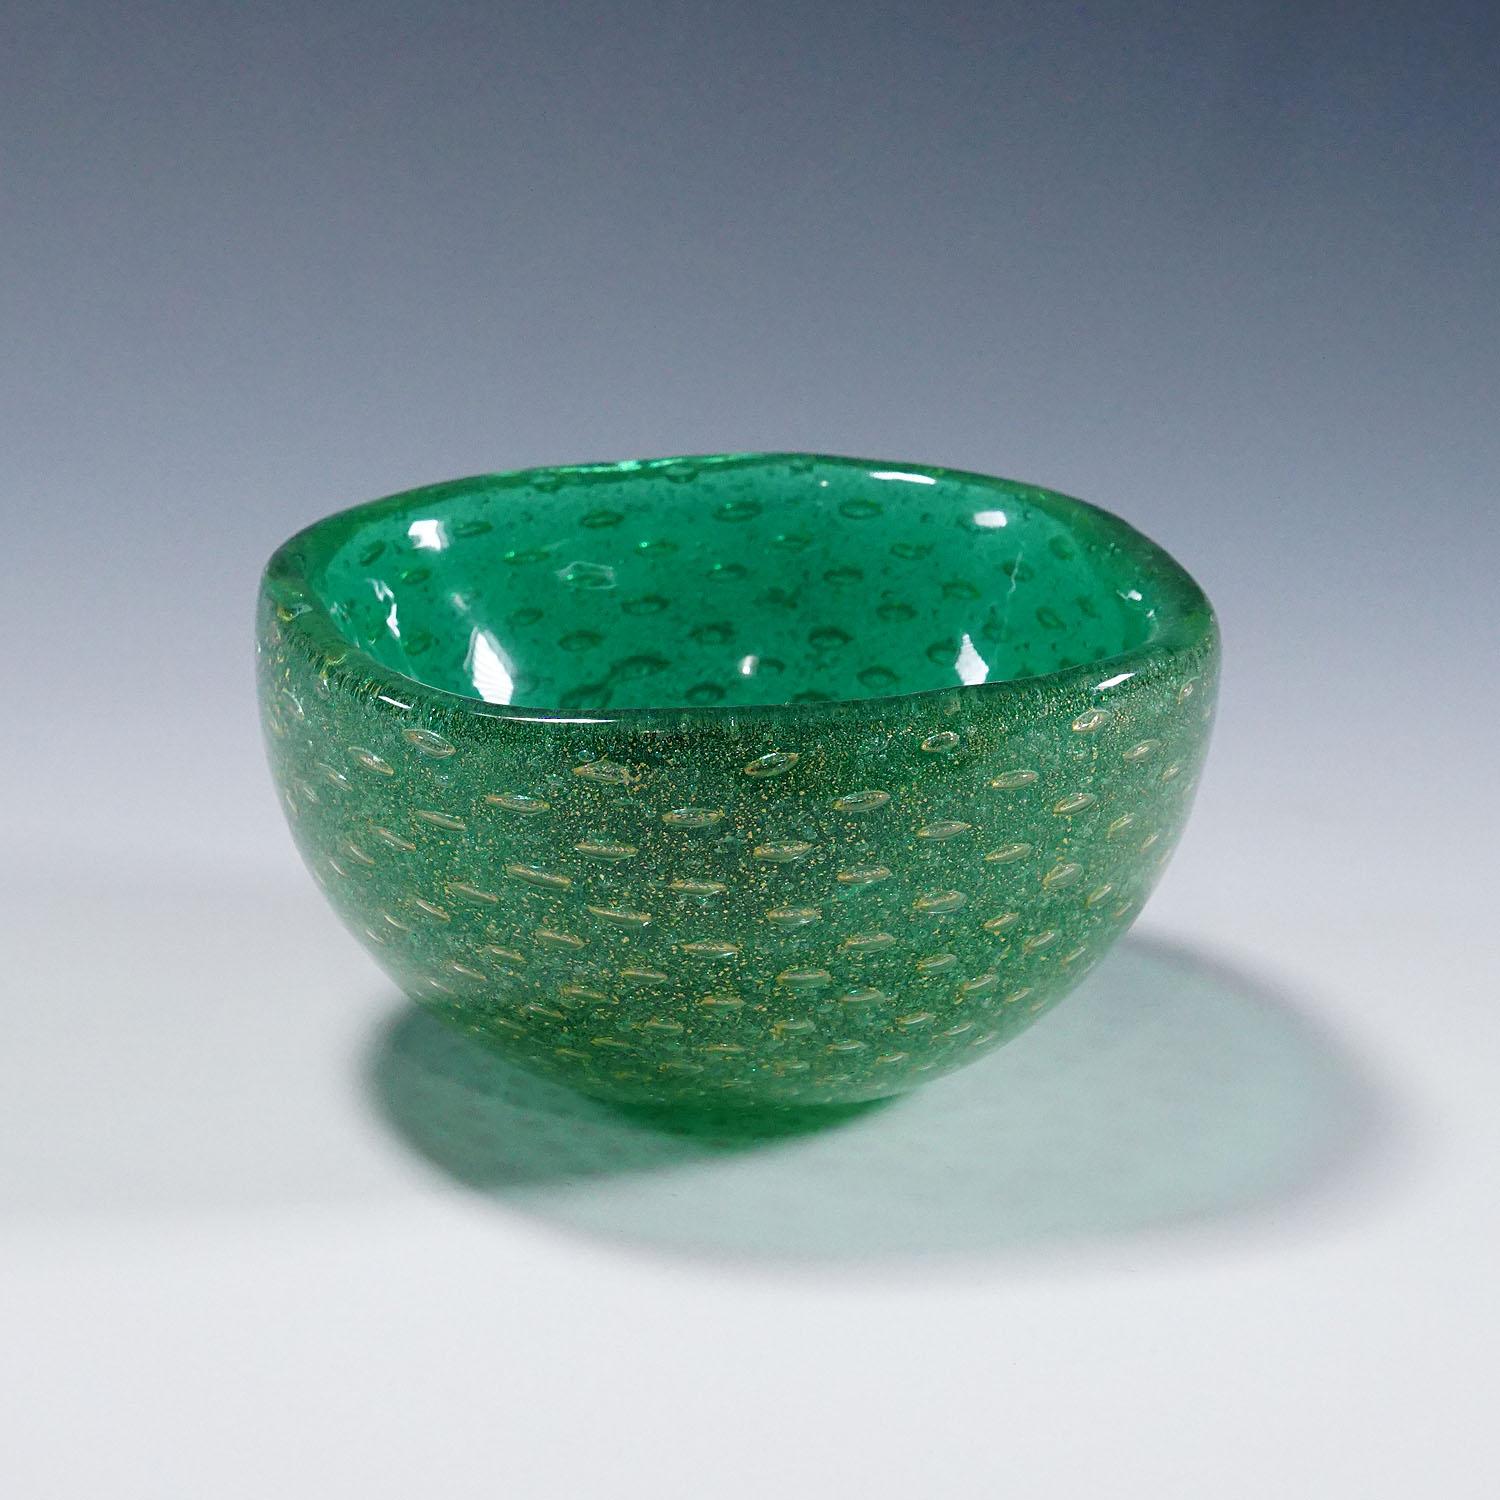 Small Bowl in Green Sommerso Glass, Carlo Scarpa for Venini Murano 1930s

An art glass bowl in green sommerso glass, designed by Carlo Scarpa and manufactured by Venini Murano Venice in the 1930s. The bowl is made of thick green glass with regular